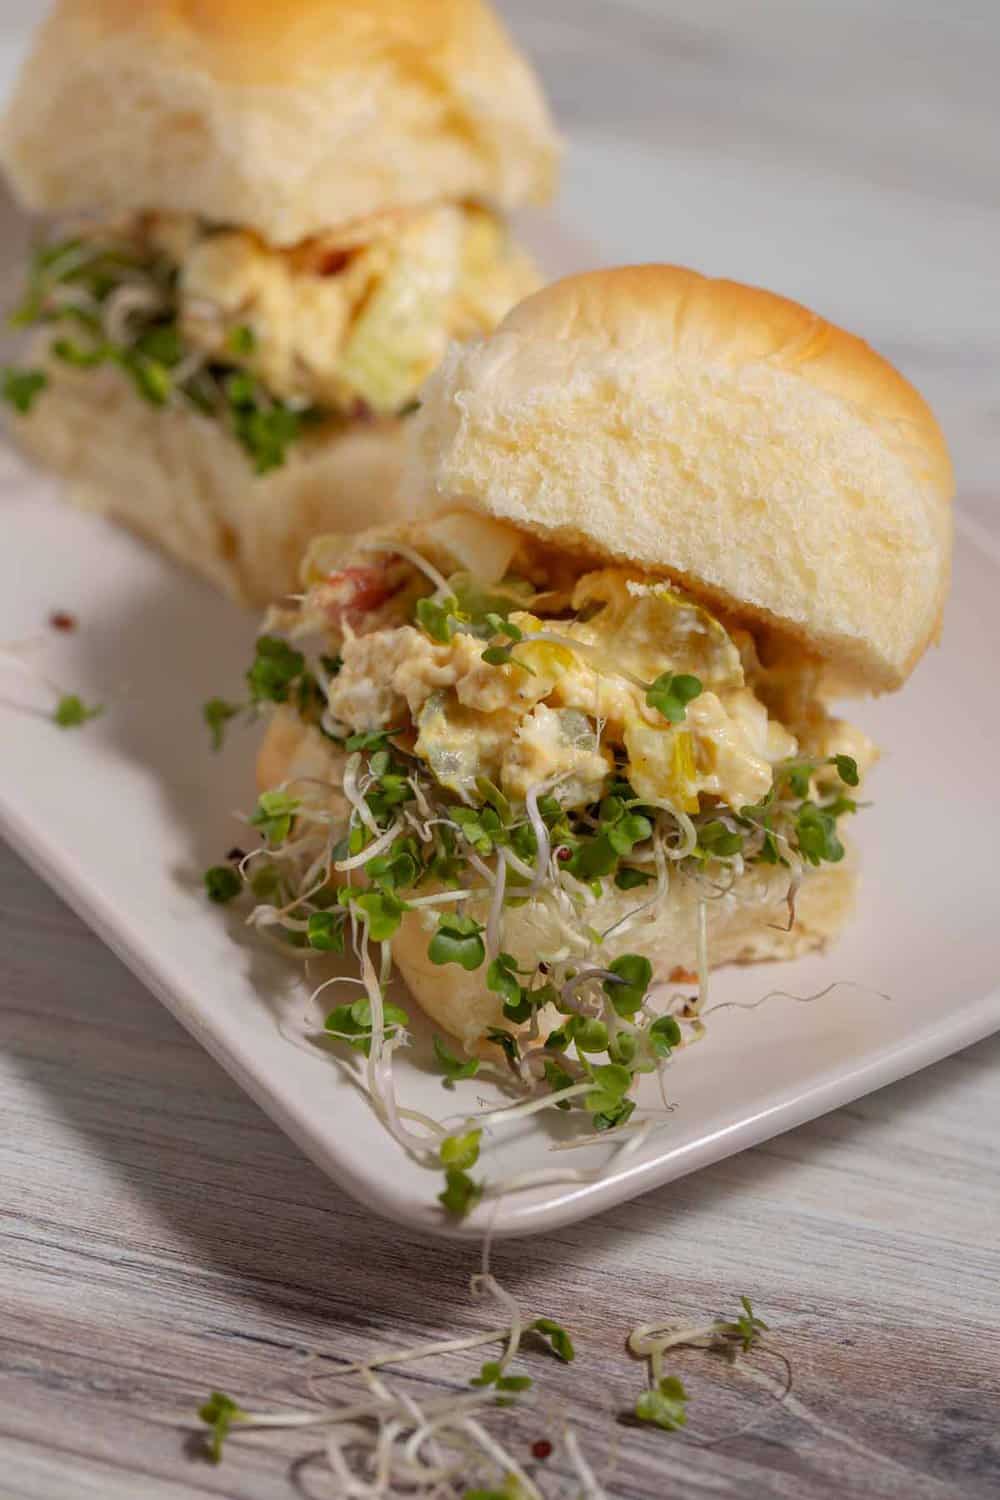 sprouts as a sandwich topping